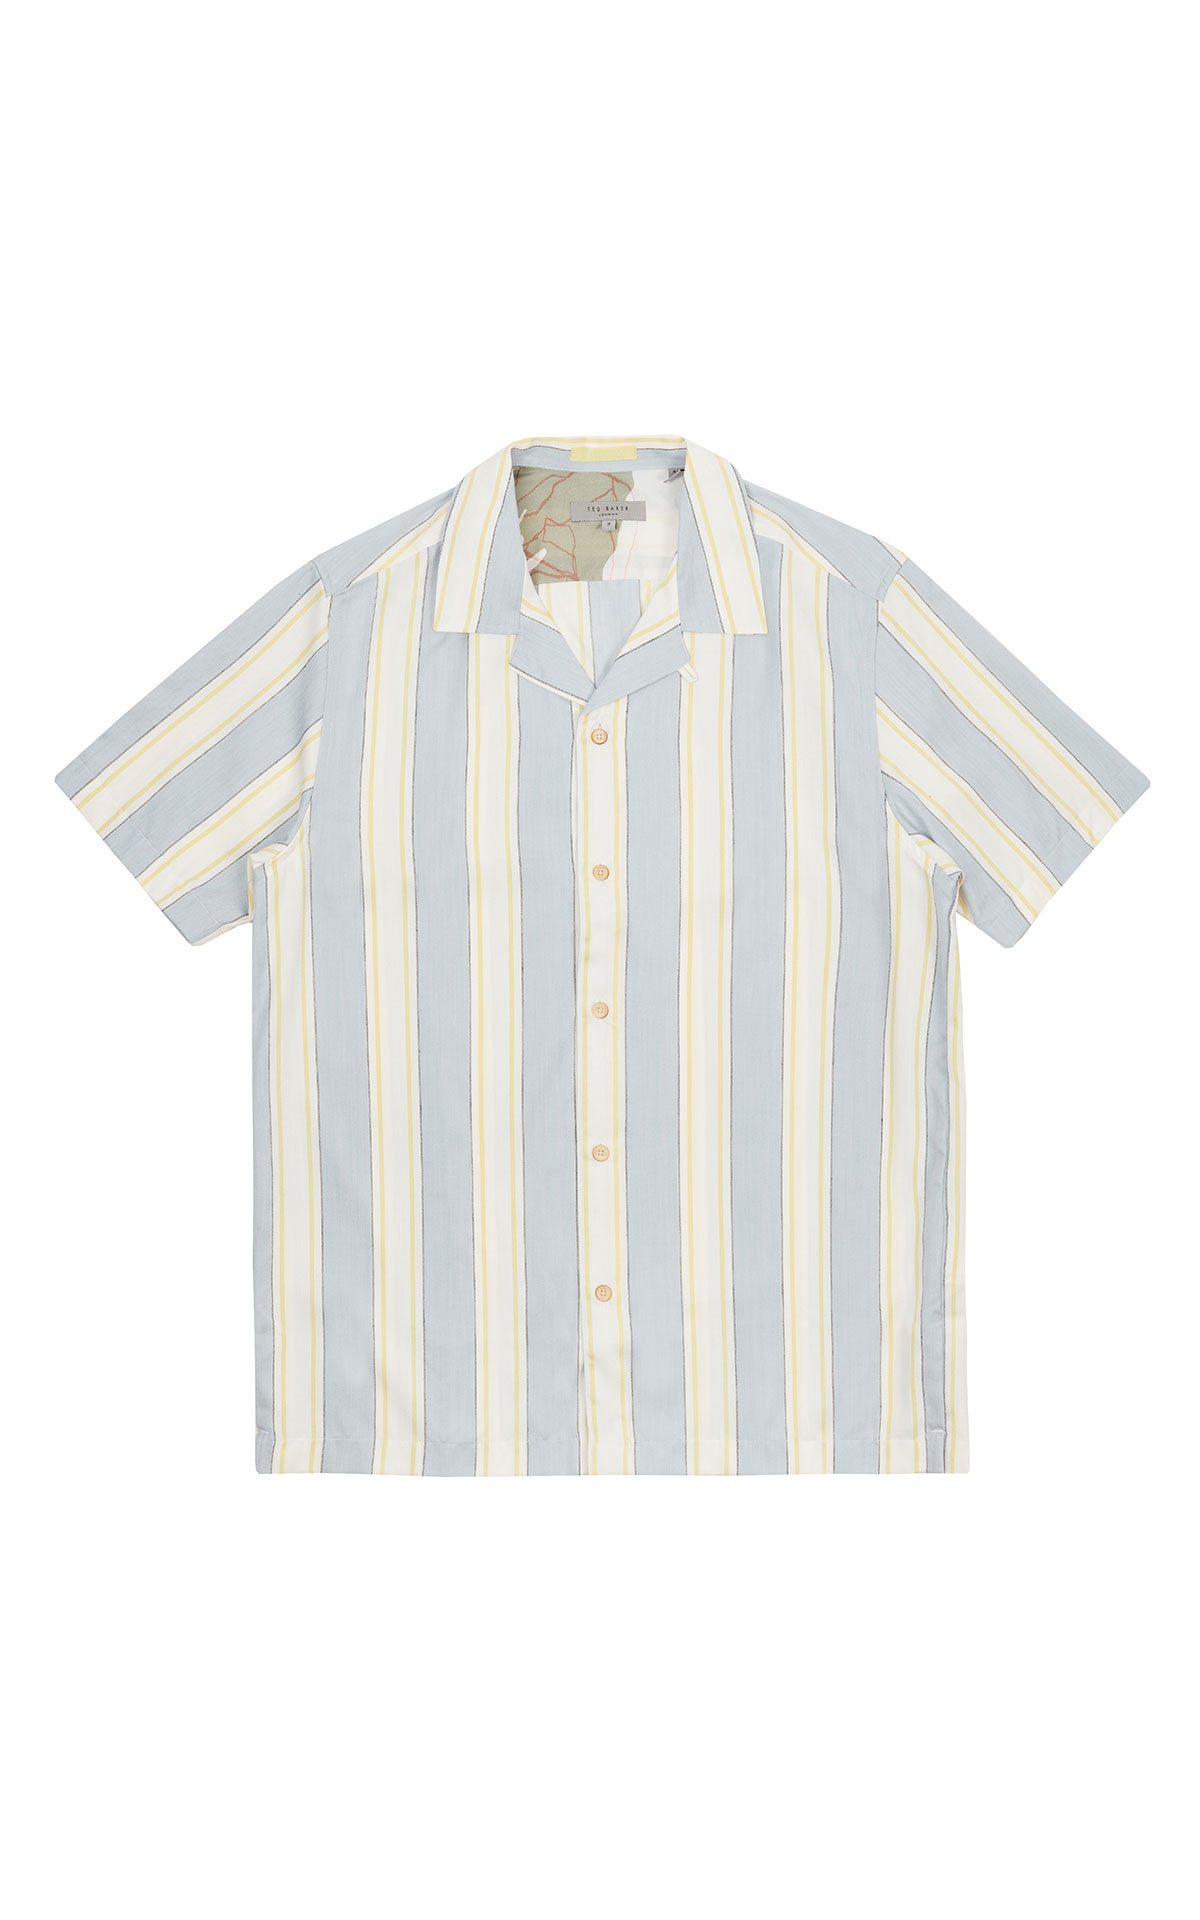 Ted Baker Blue striped shirt from Bicester Village